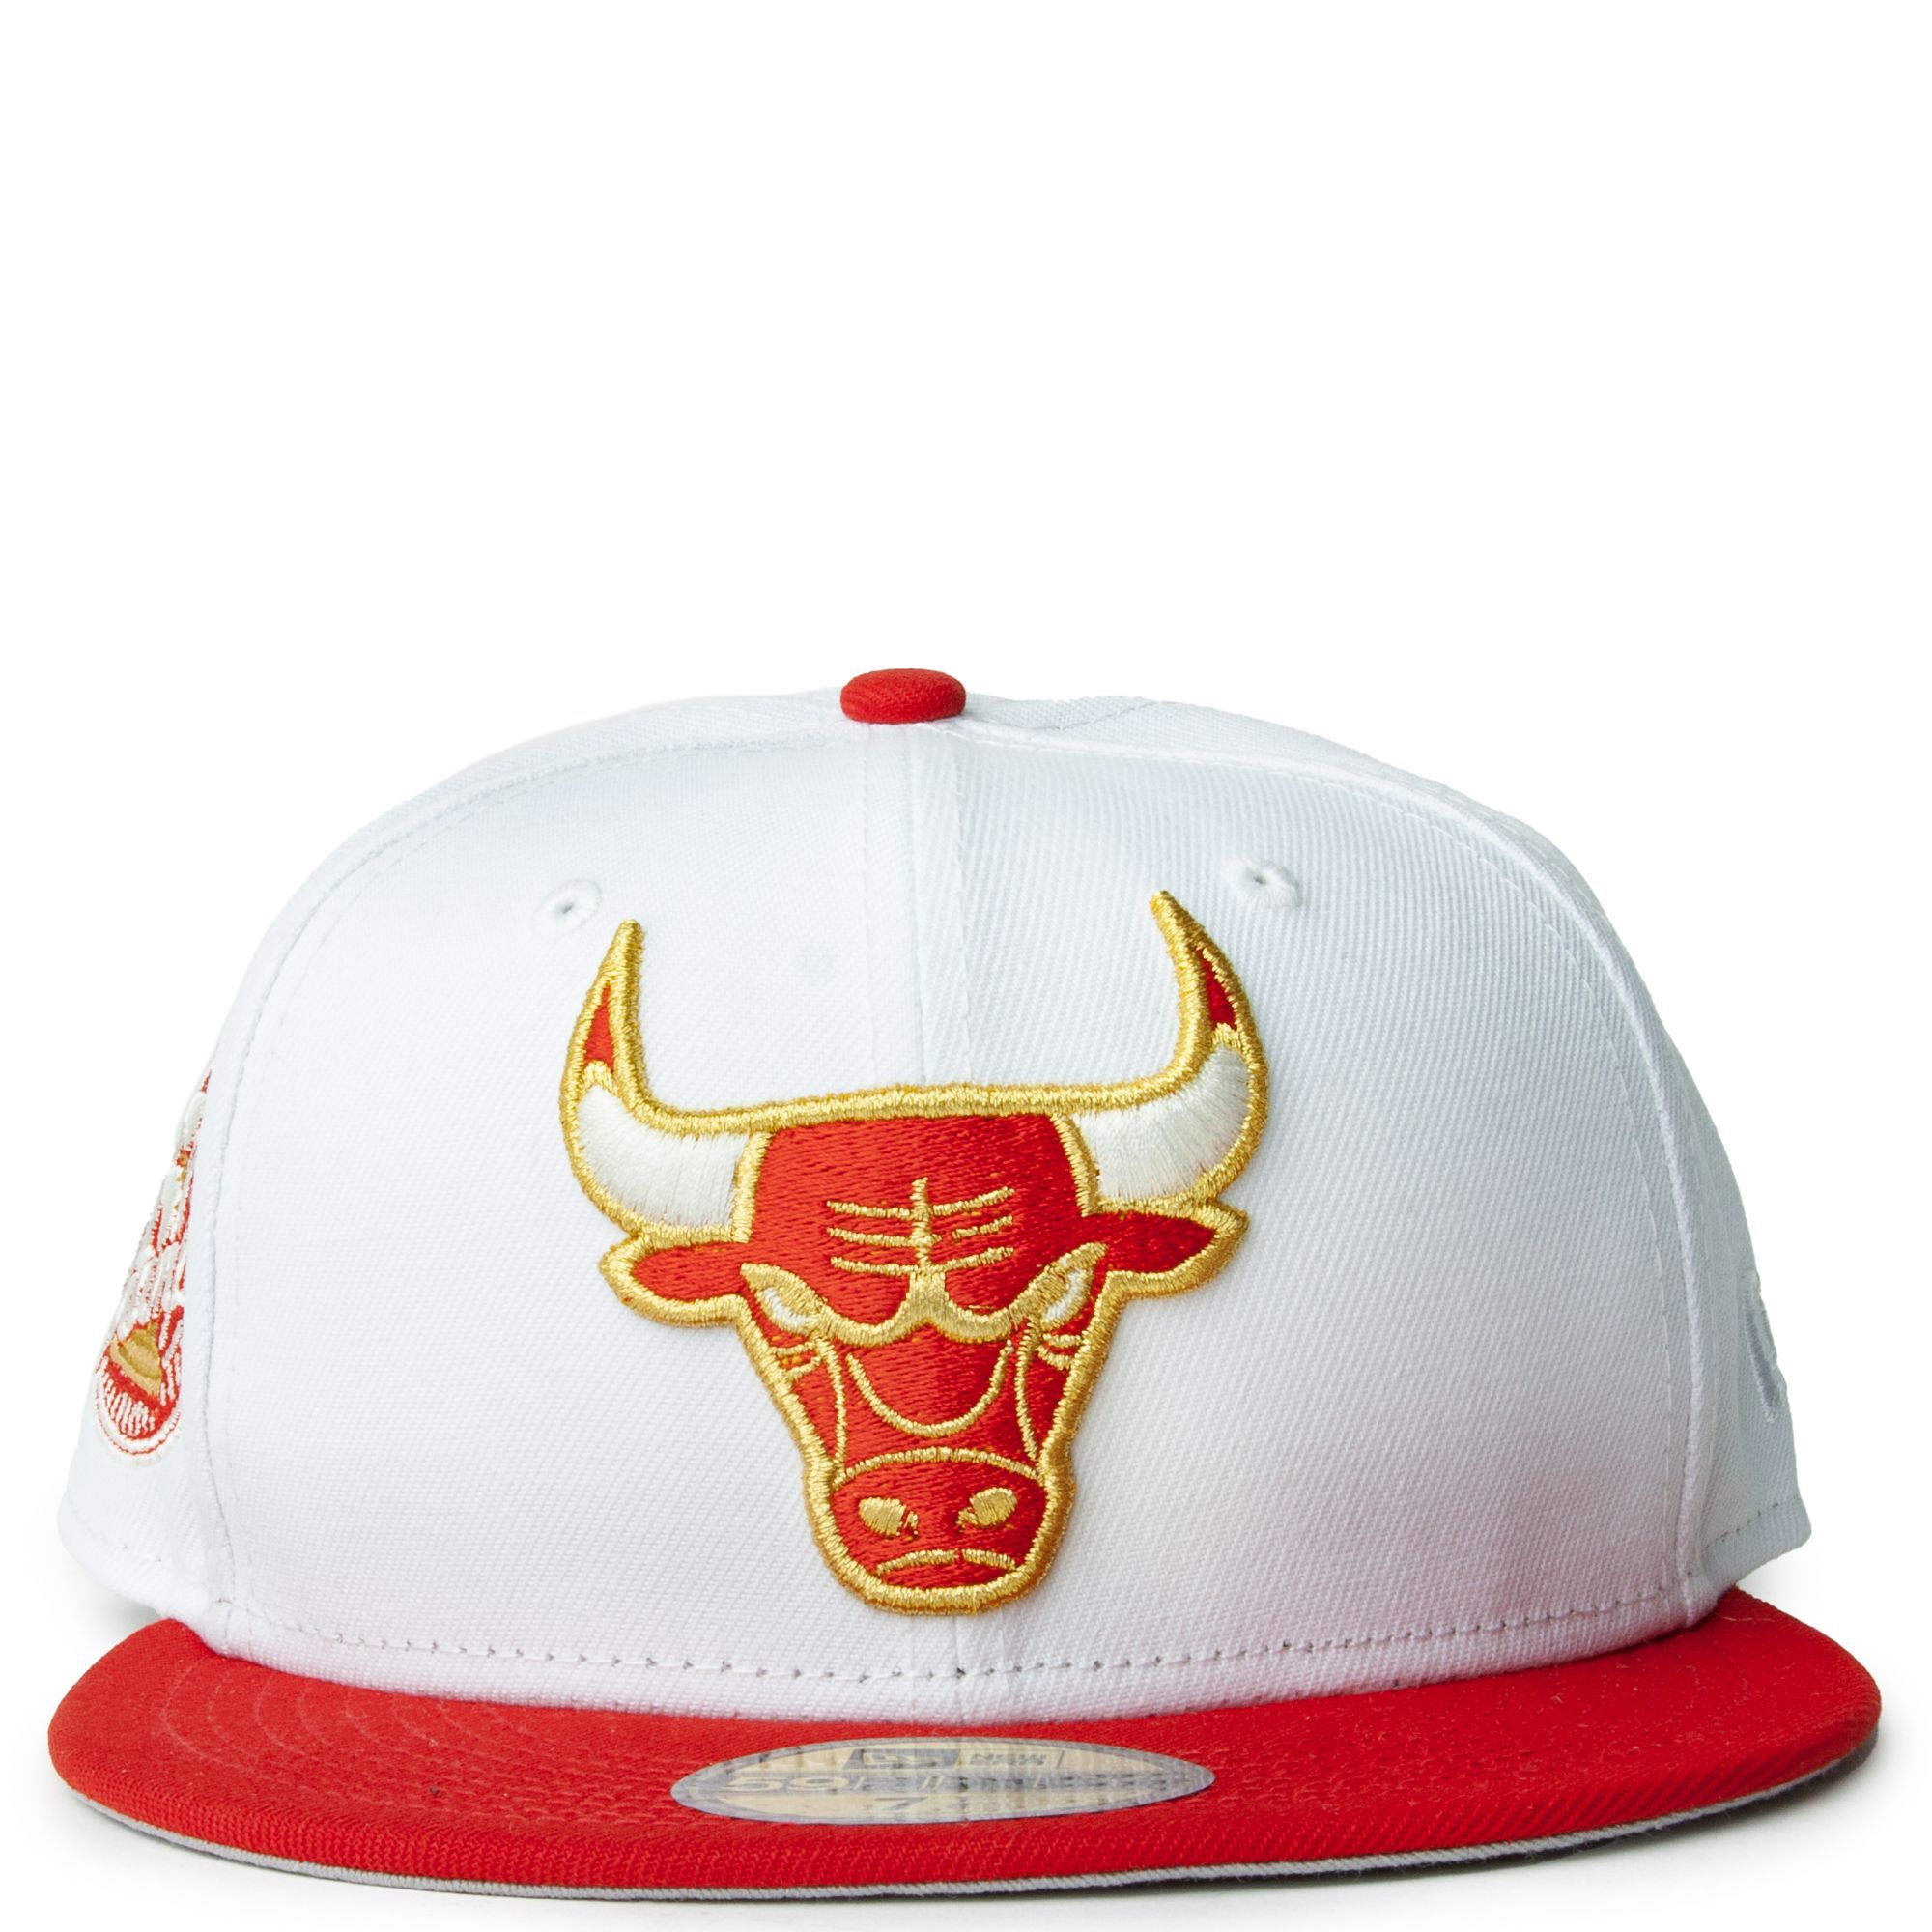 New Era Chicago Bulls 'Grey Skies' 59FIFTY Fitted Grey - Size 734